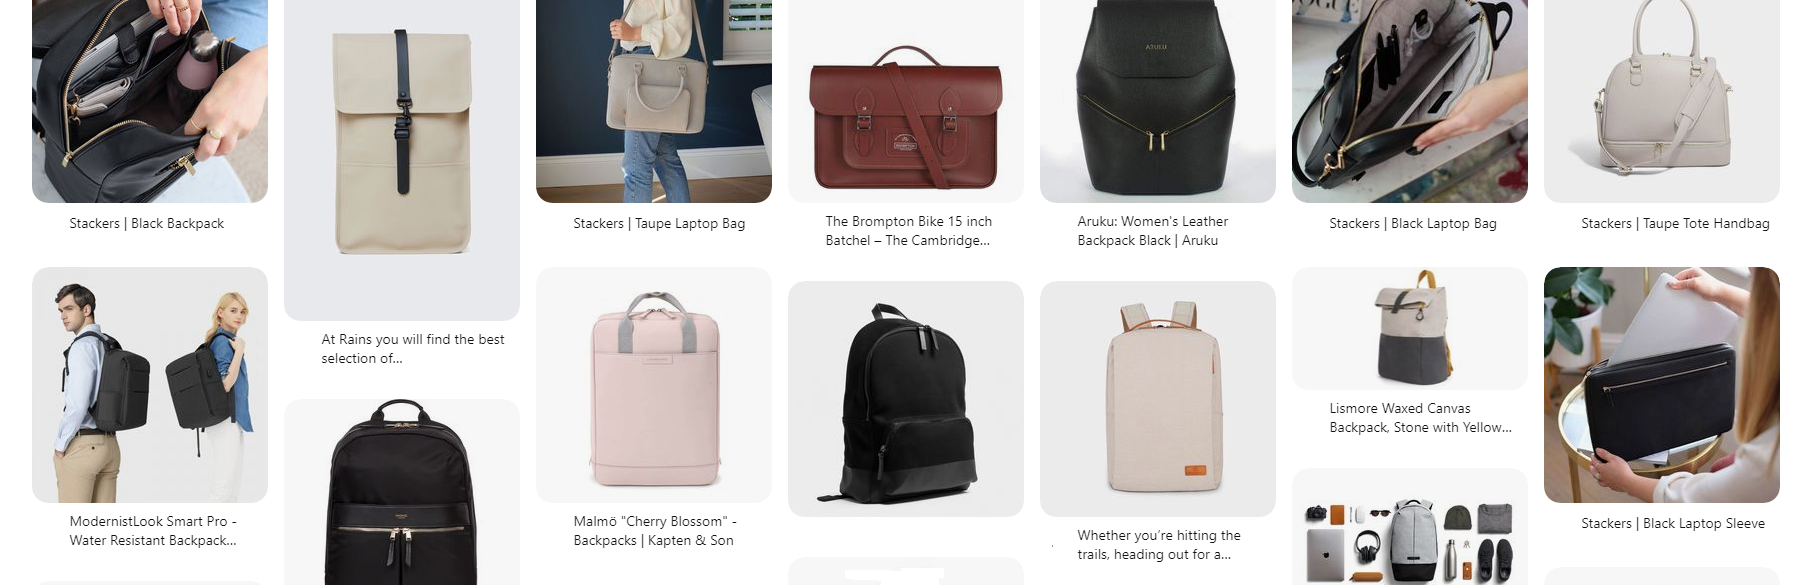 The Ultimate List of Professional Bags for Women (UK) | by Kimberley Risley  | Medium